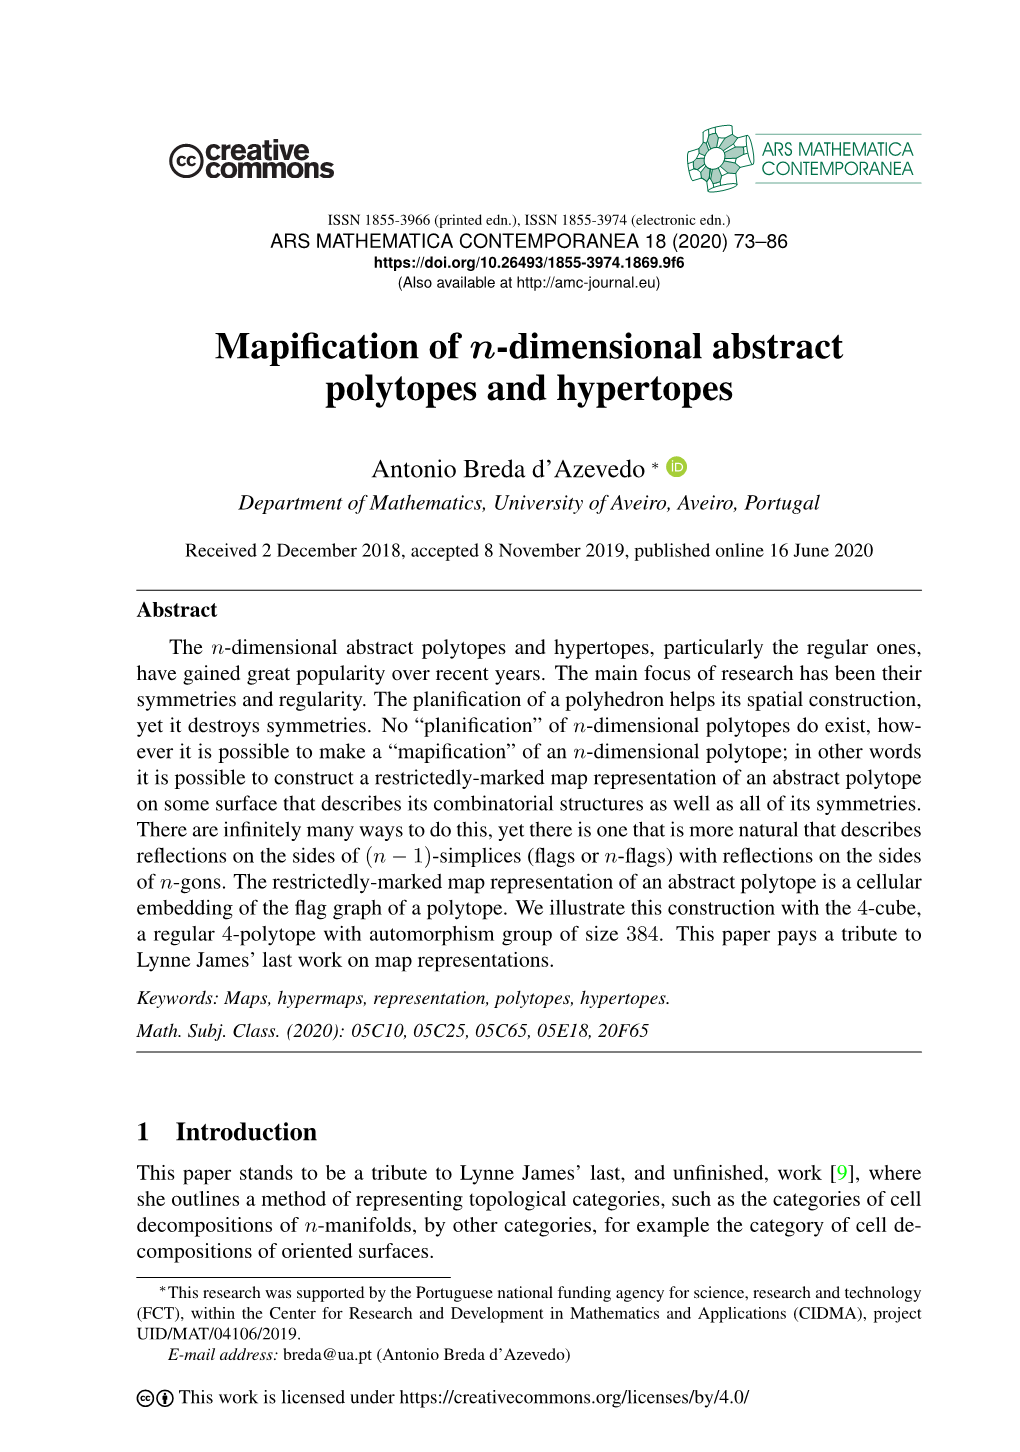 Mapification of N-Dimensional Abstract Polytopes and Hypertopes